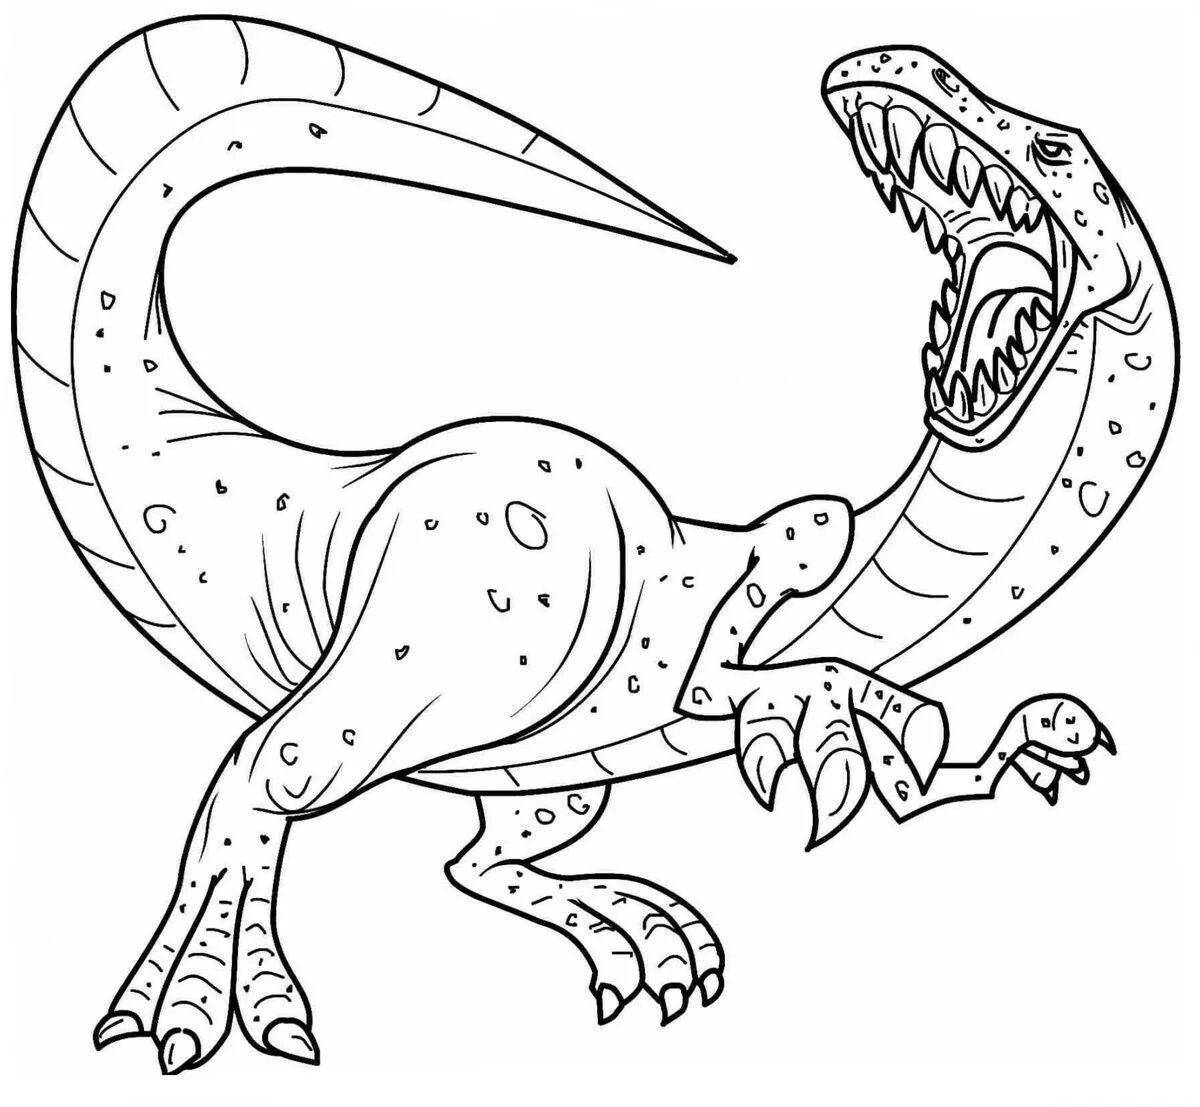 Majestic dinosaur coloring pages all